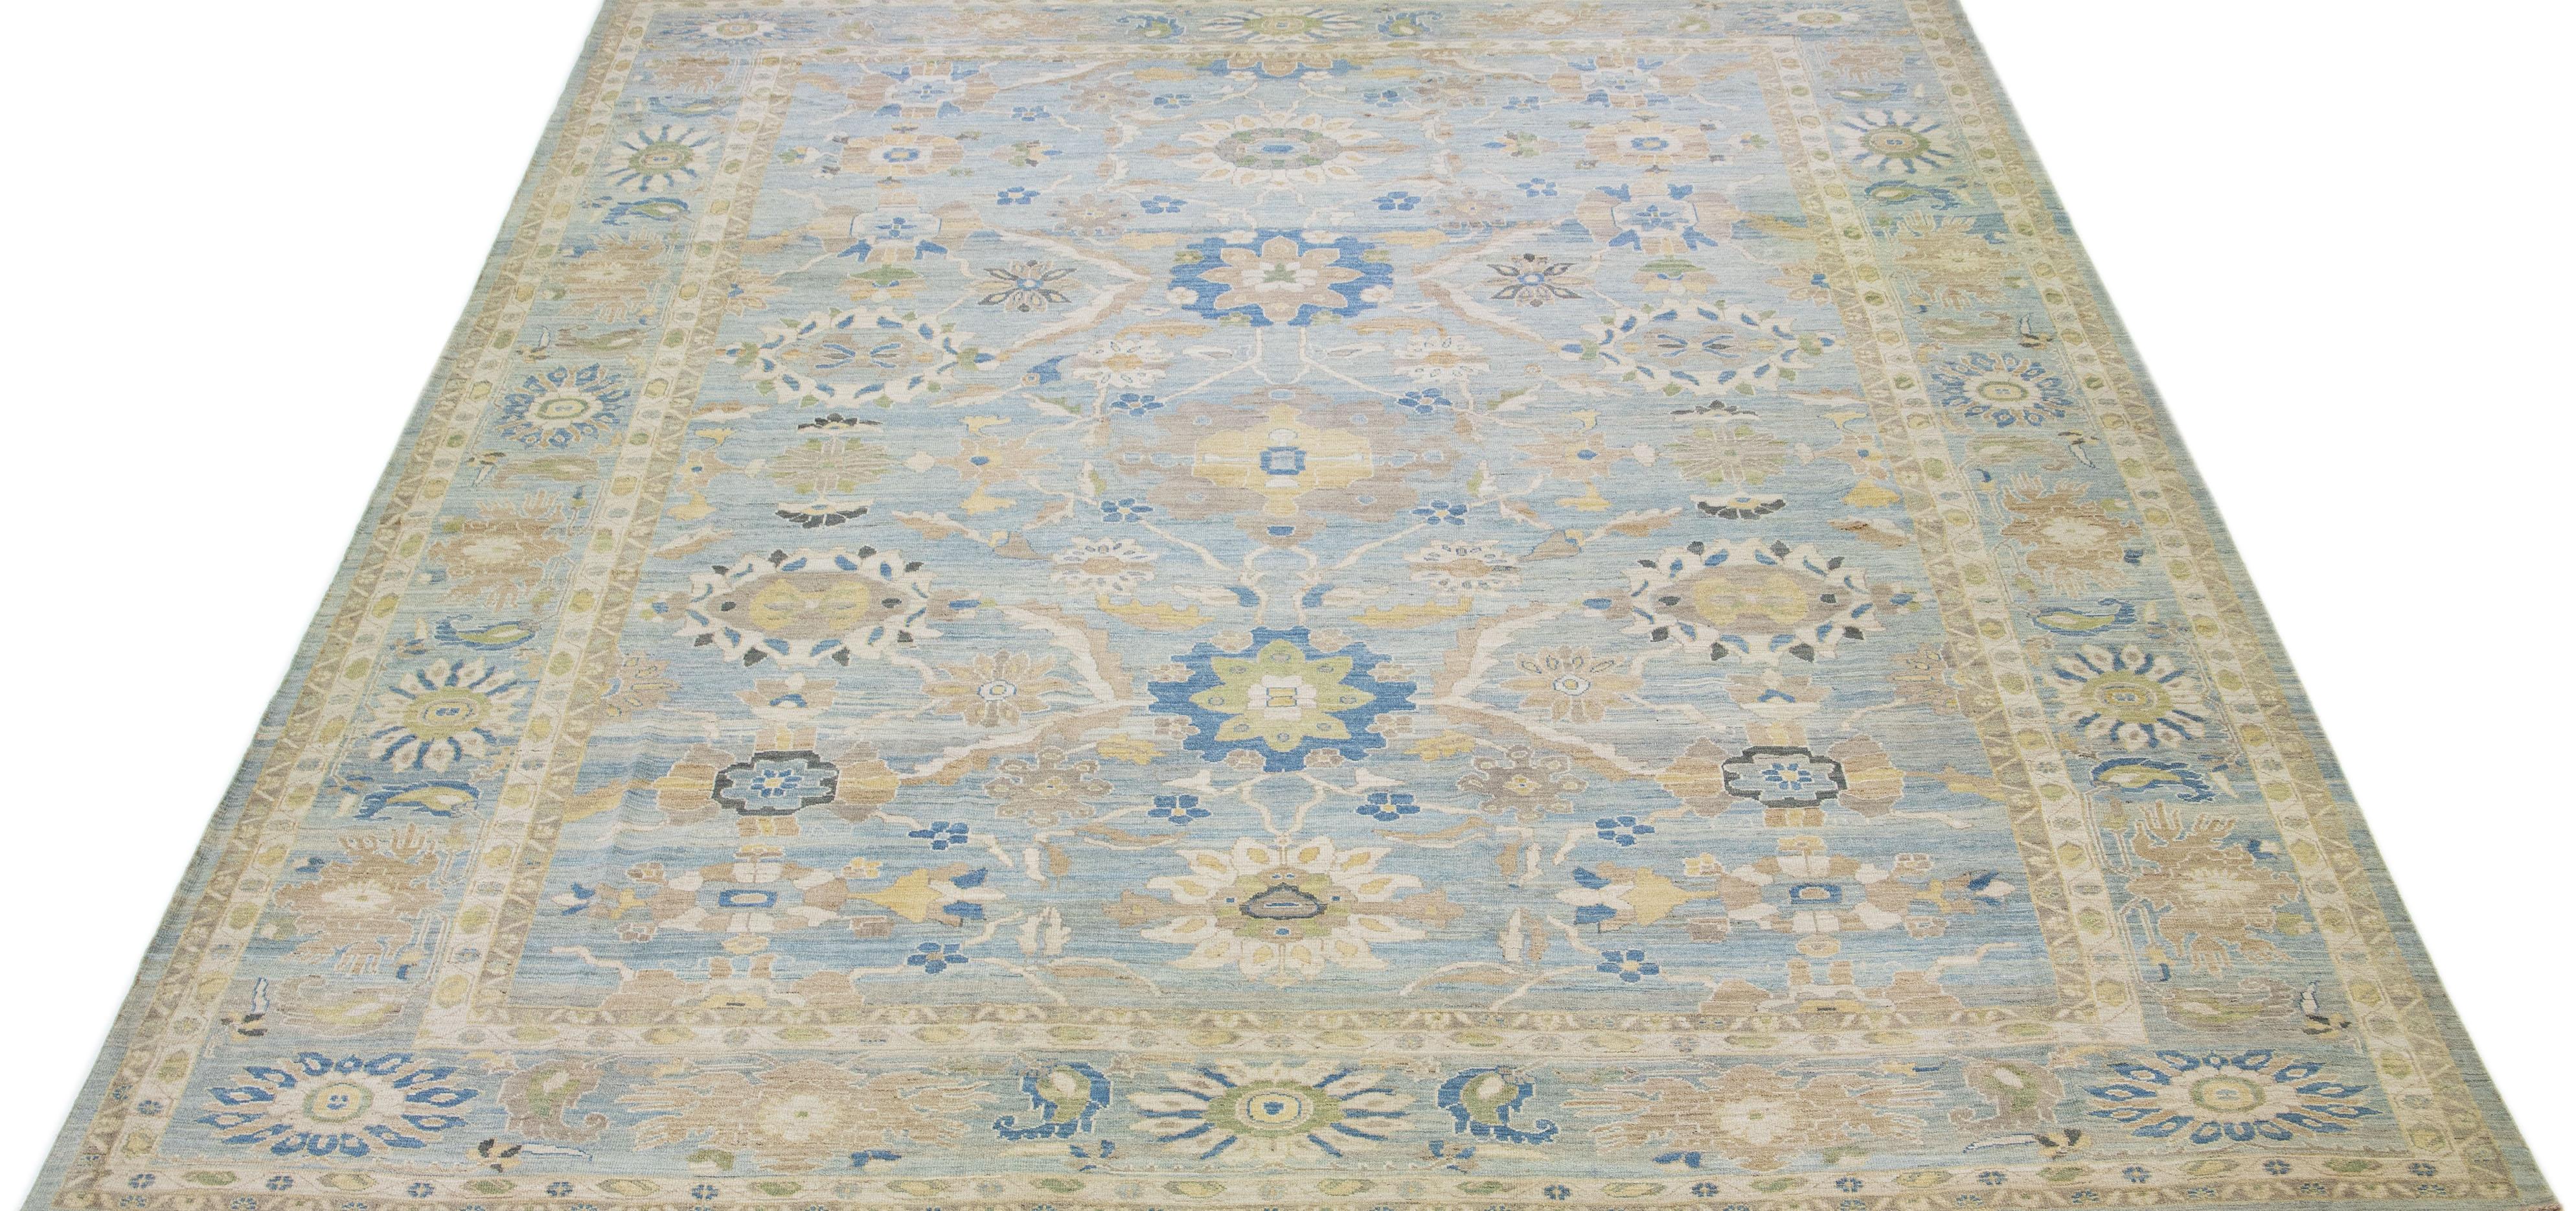 Beautiful modern Sultanabad hand knotted wool rug with a light blue color field. This rug has a designed frame with beige, green, and brown accents in a gorgeous all-over floral design.

This rug measures: 14'10